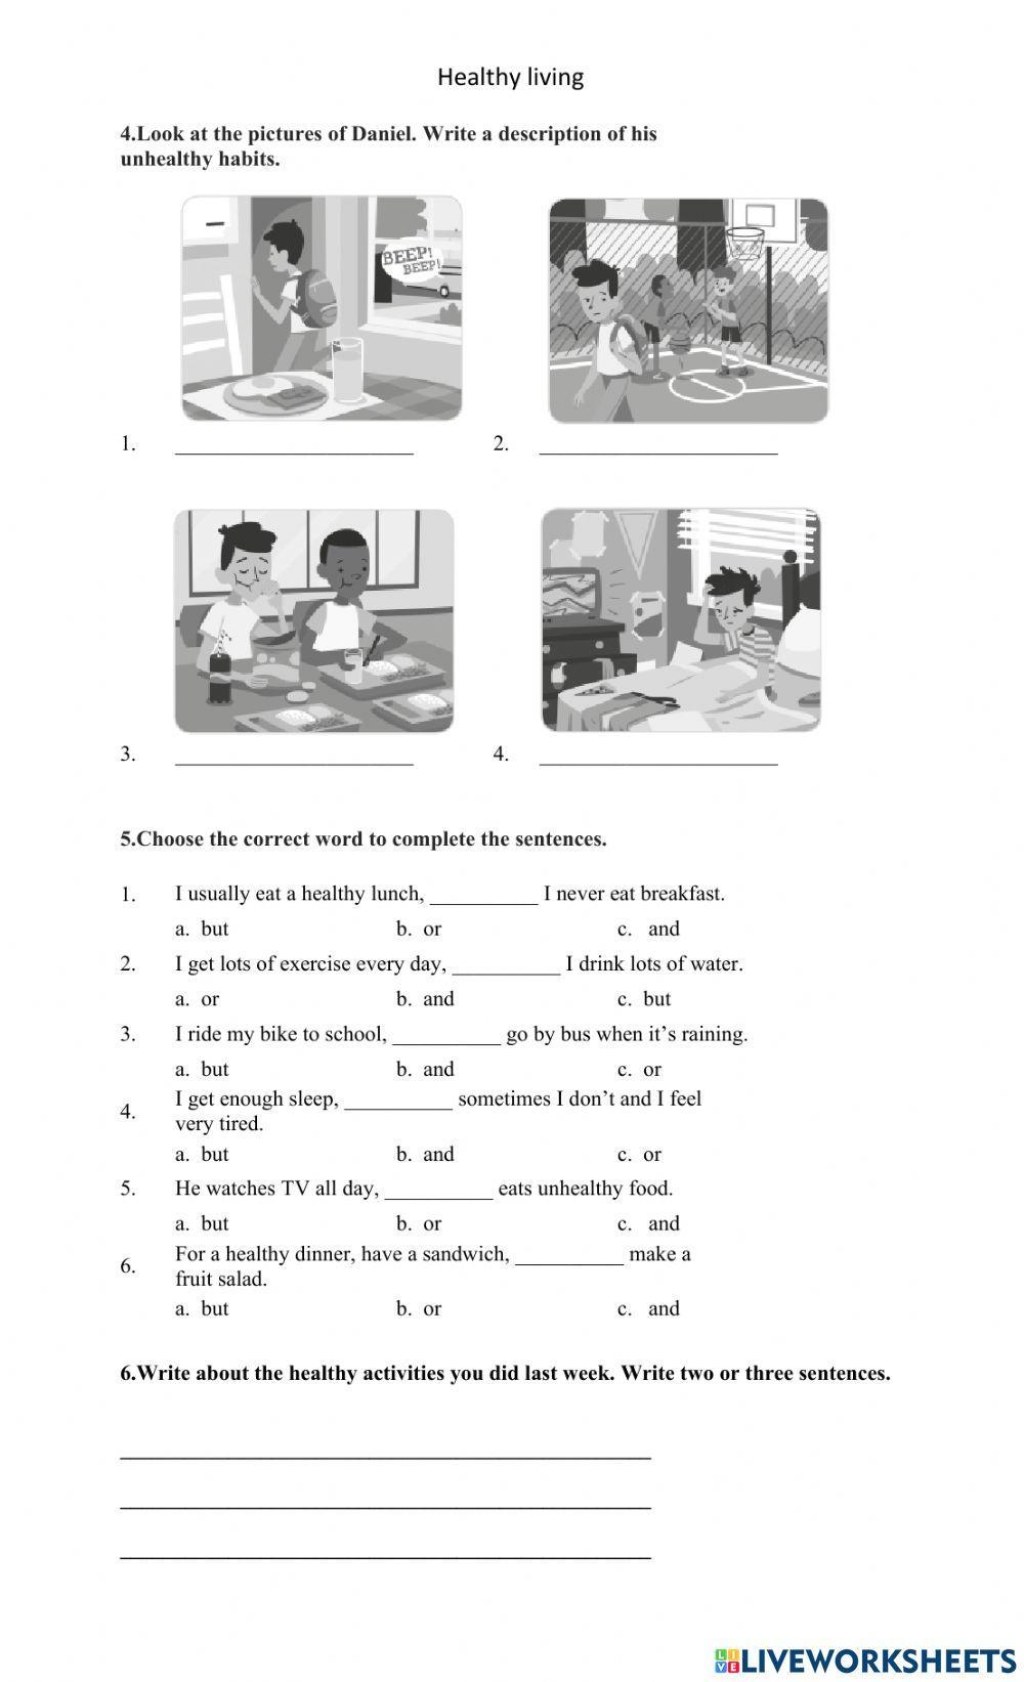 Picture of: Healthy living online exercise  Live Worksheets